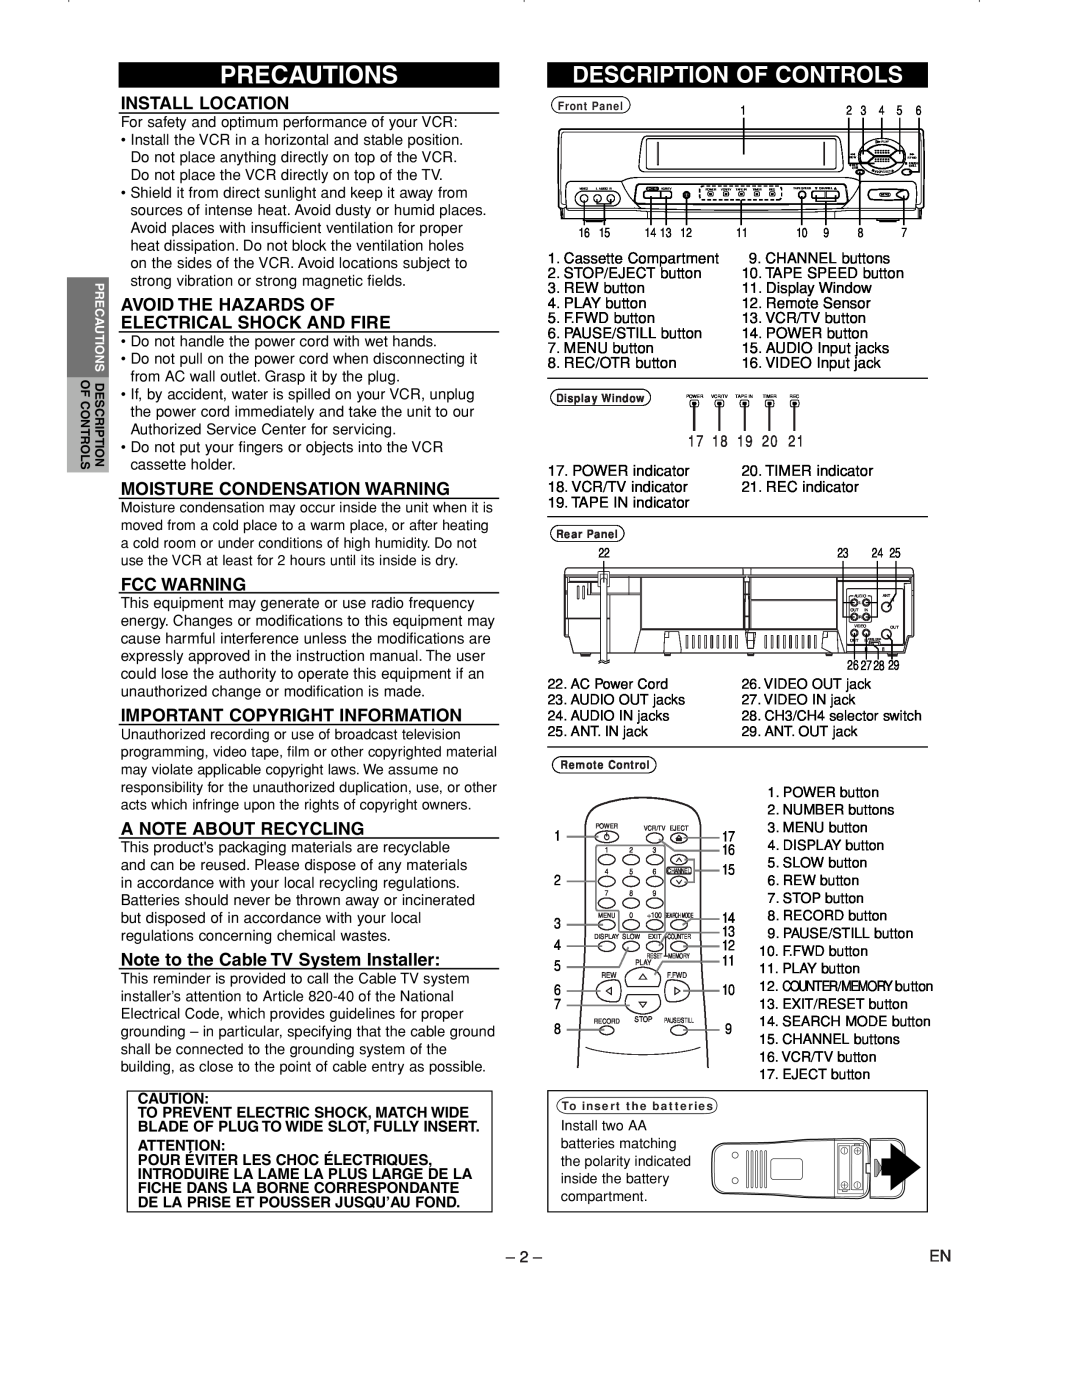 Emerson EWV601B warranty Precautions, Install Location, Avoid The Hazards Of Electrical Shock And Fire, Fcc Warning 